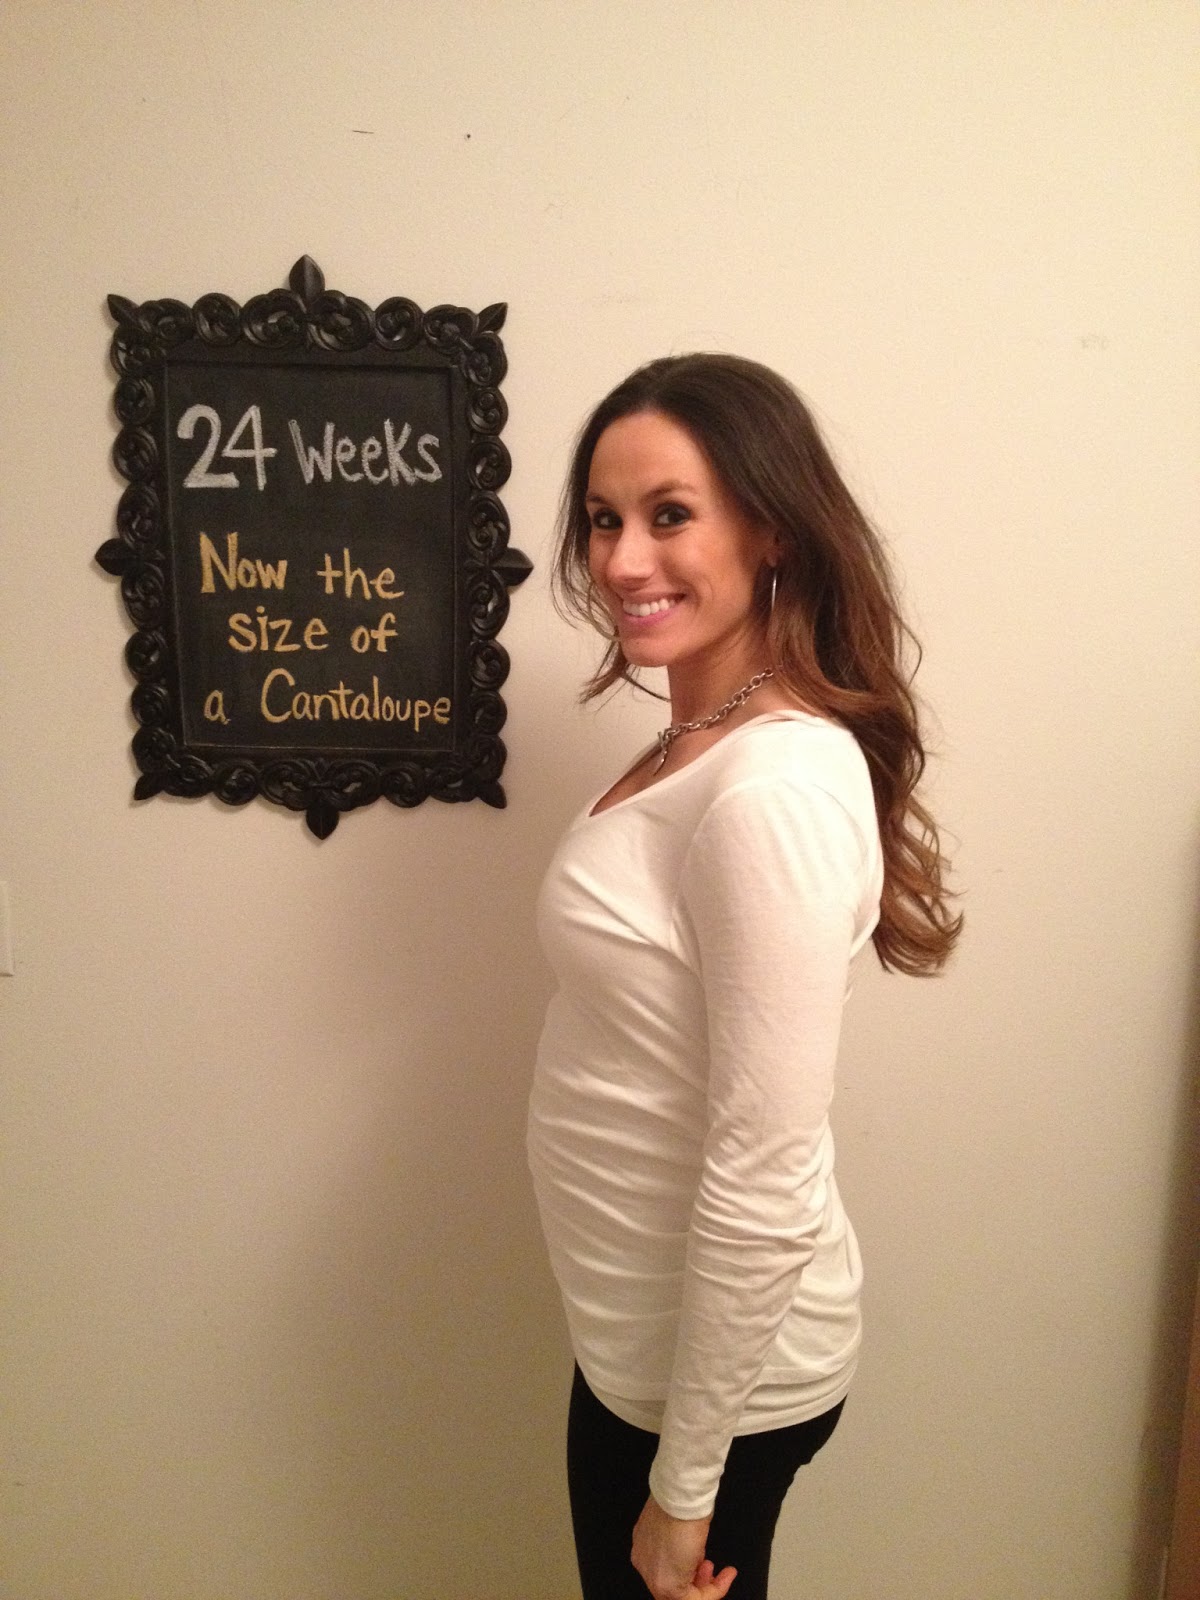 Baby Development At 24 Weeks: Your Little One Is Growing Fast!